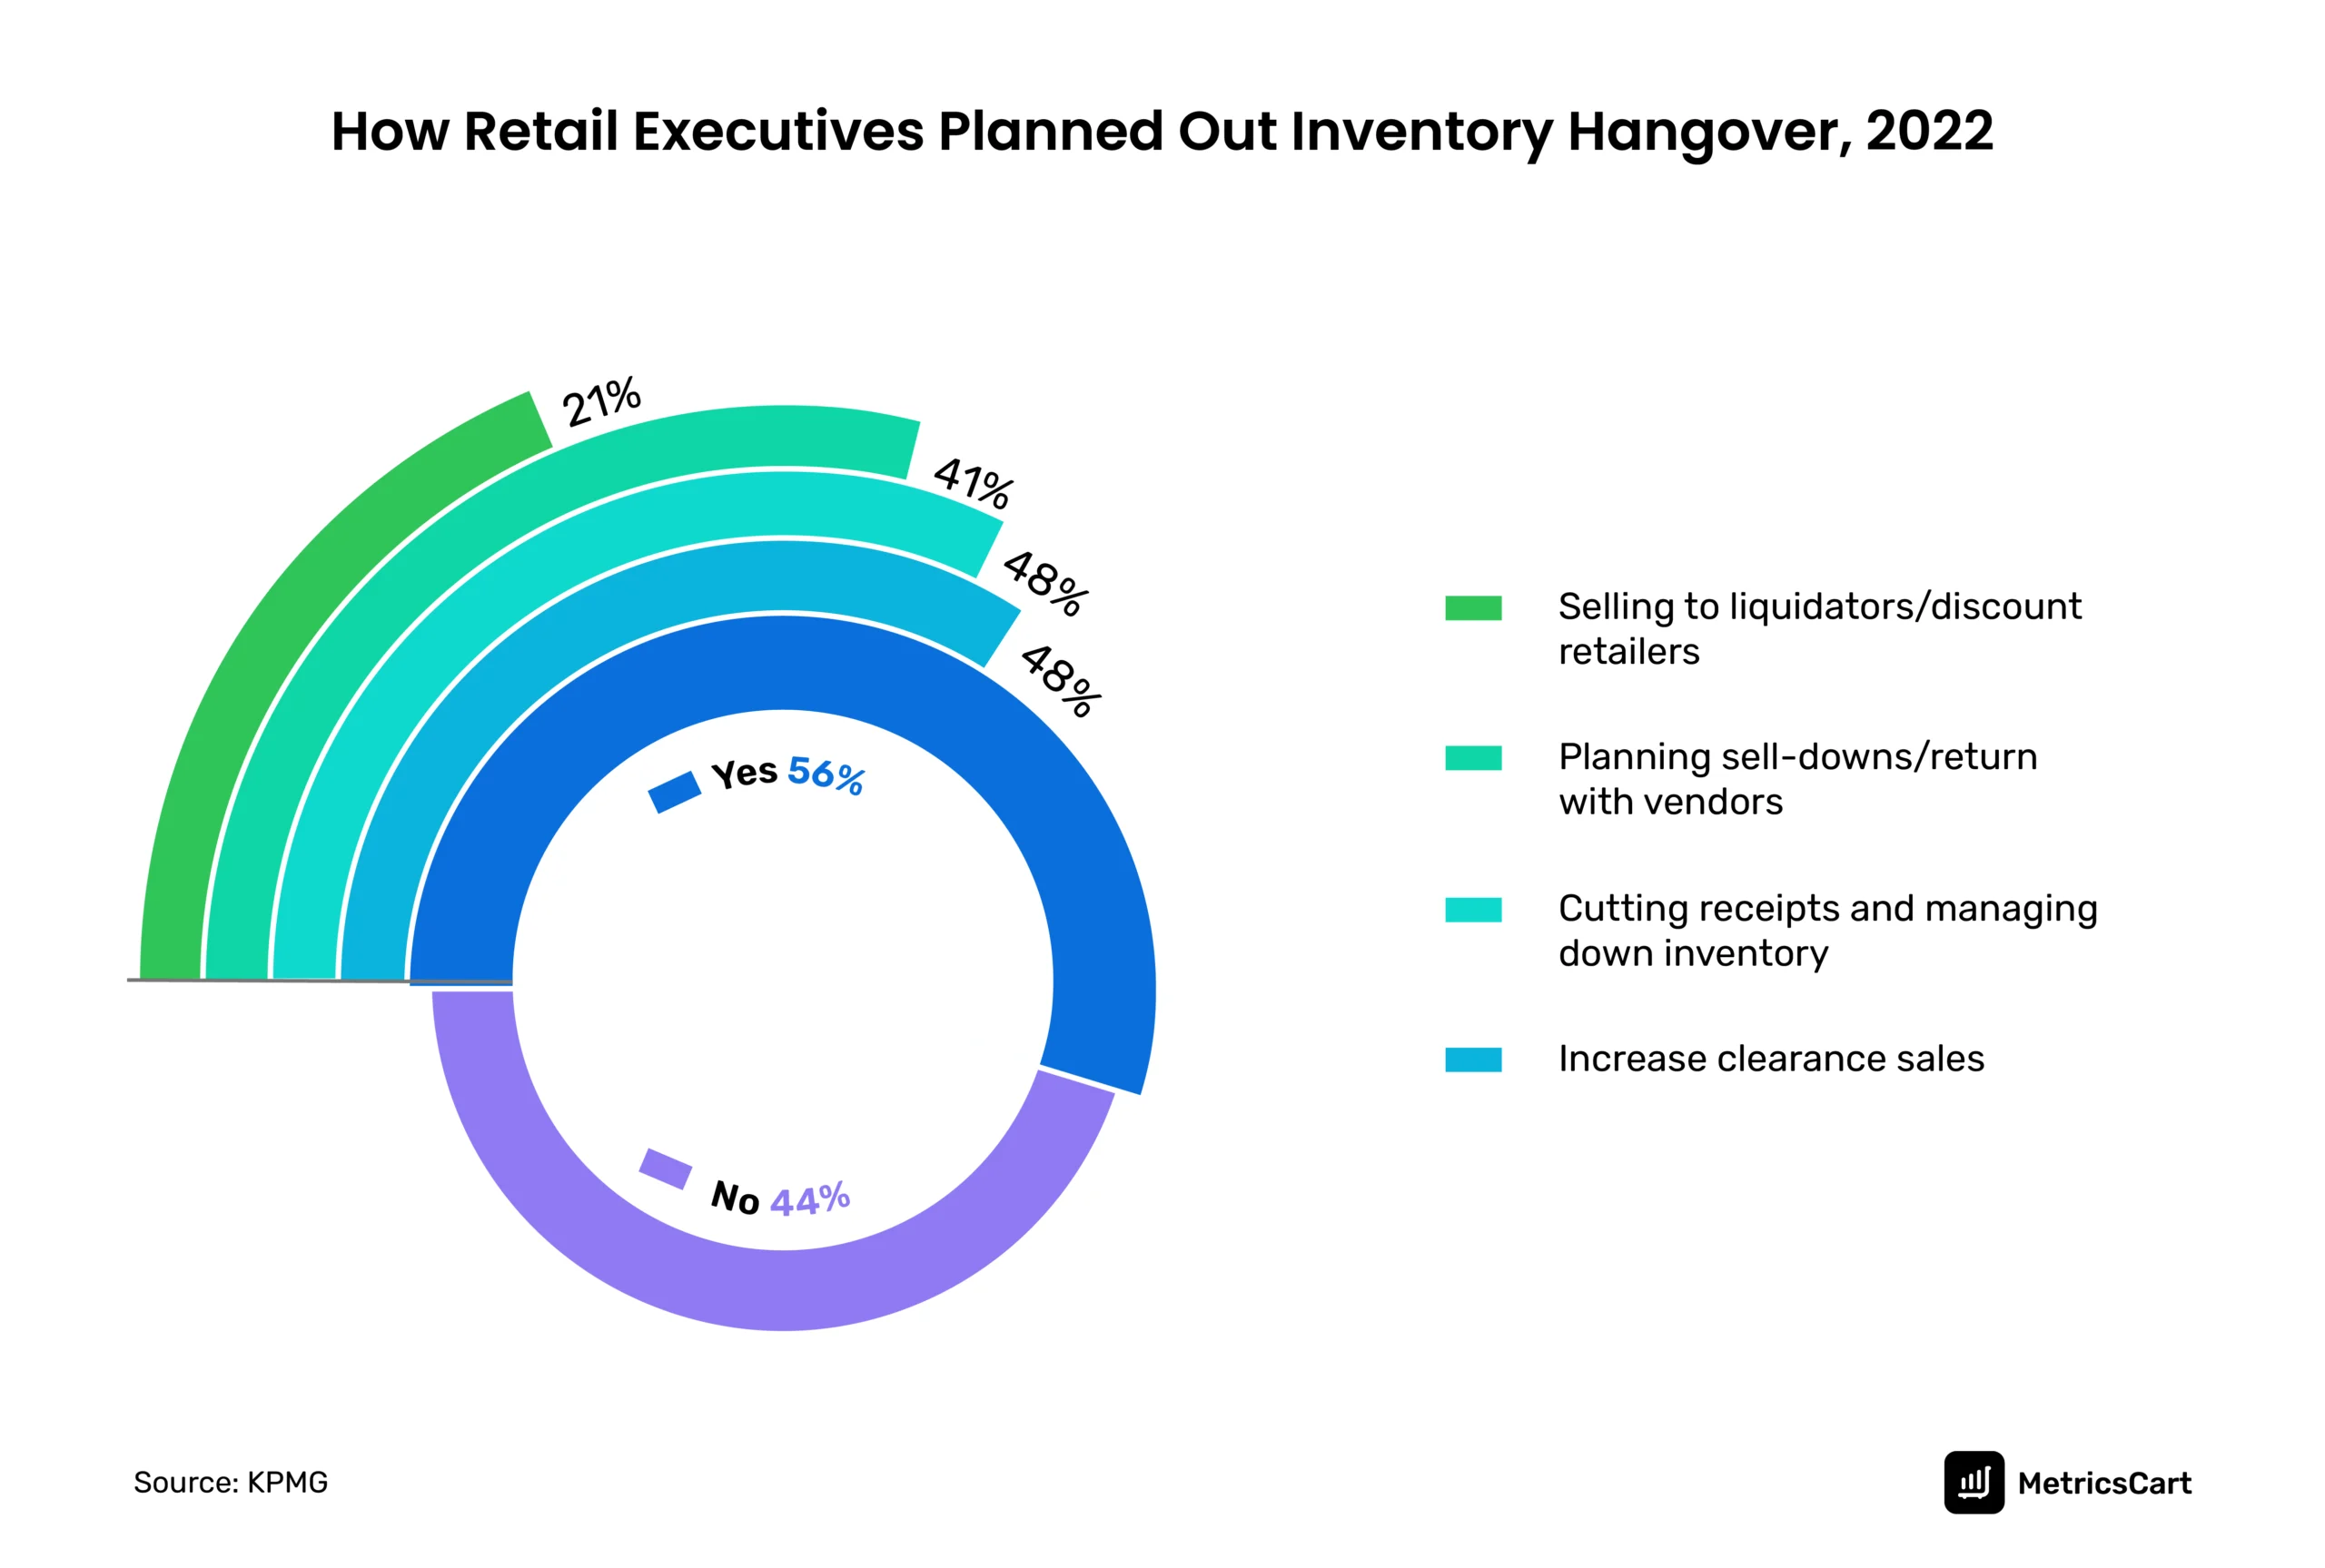 chart showing how retail executives planned inventory hangover, 2022